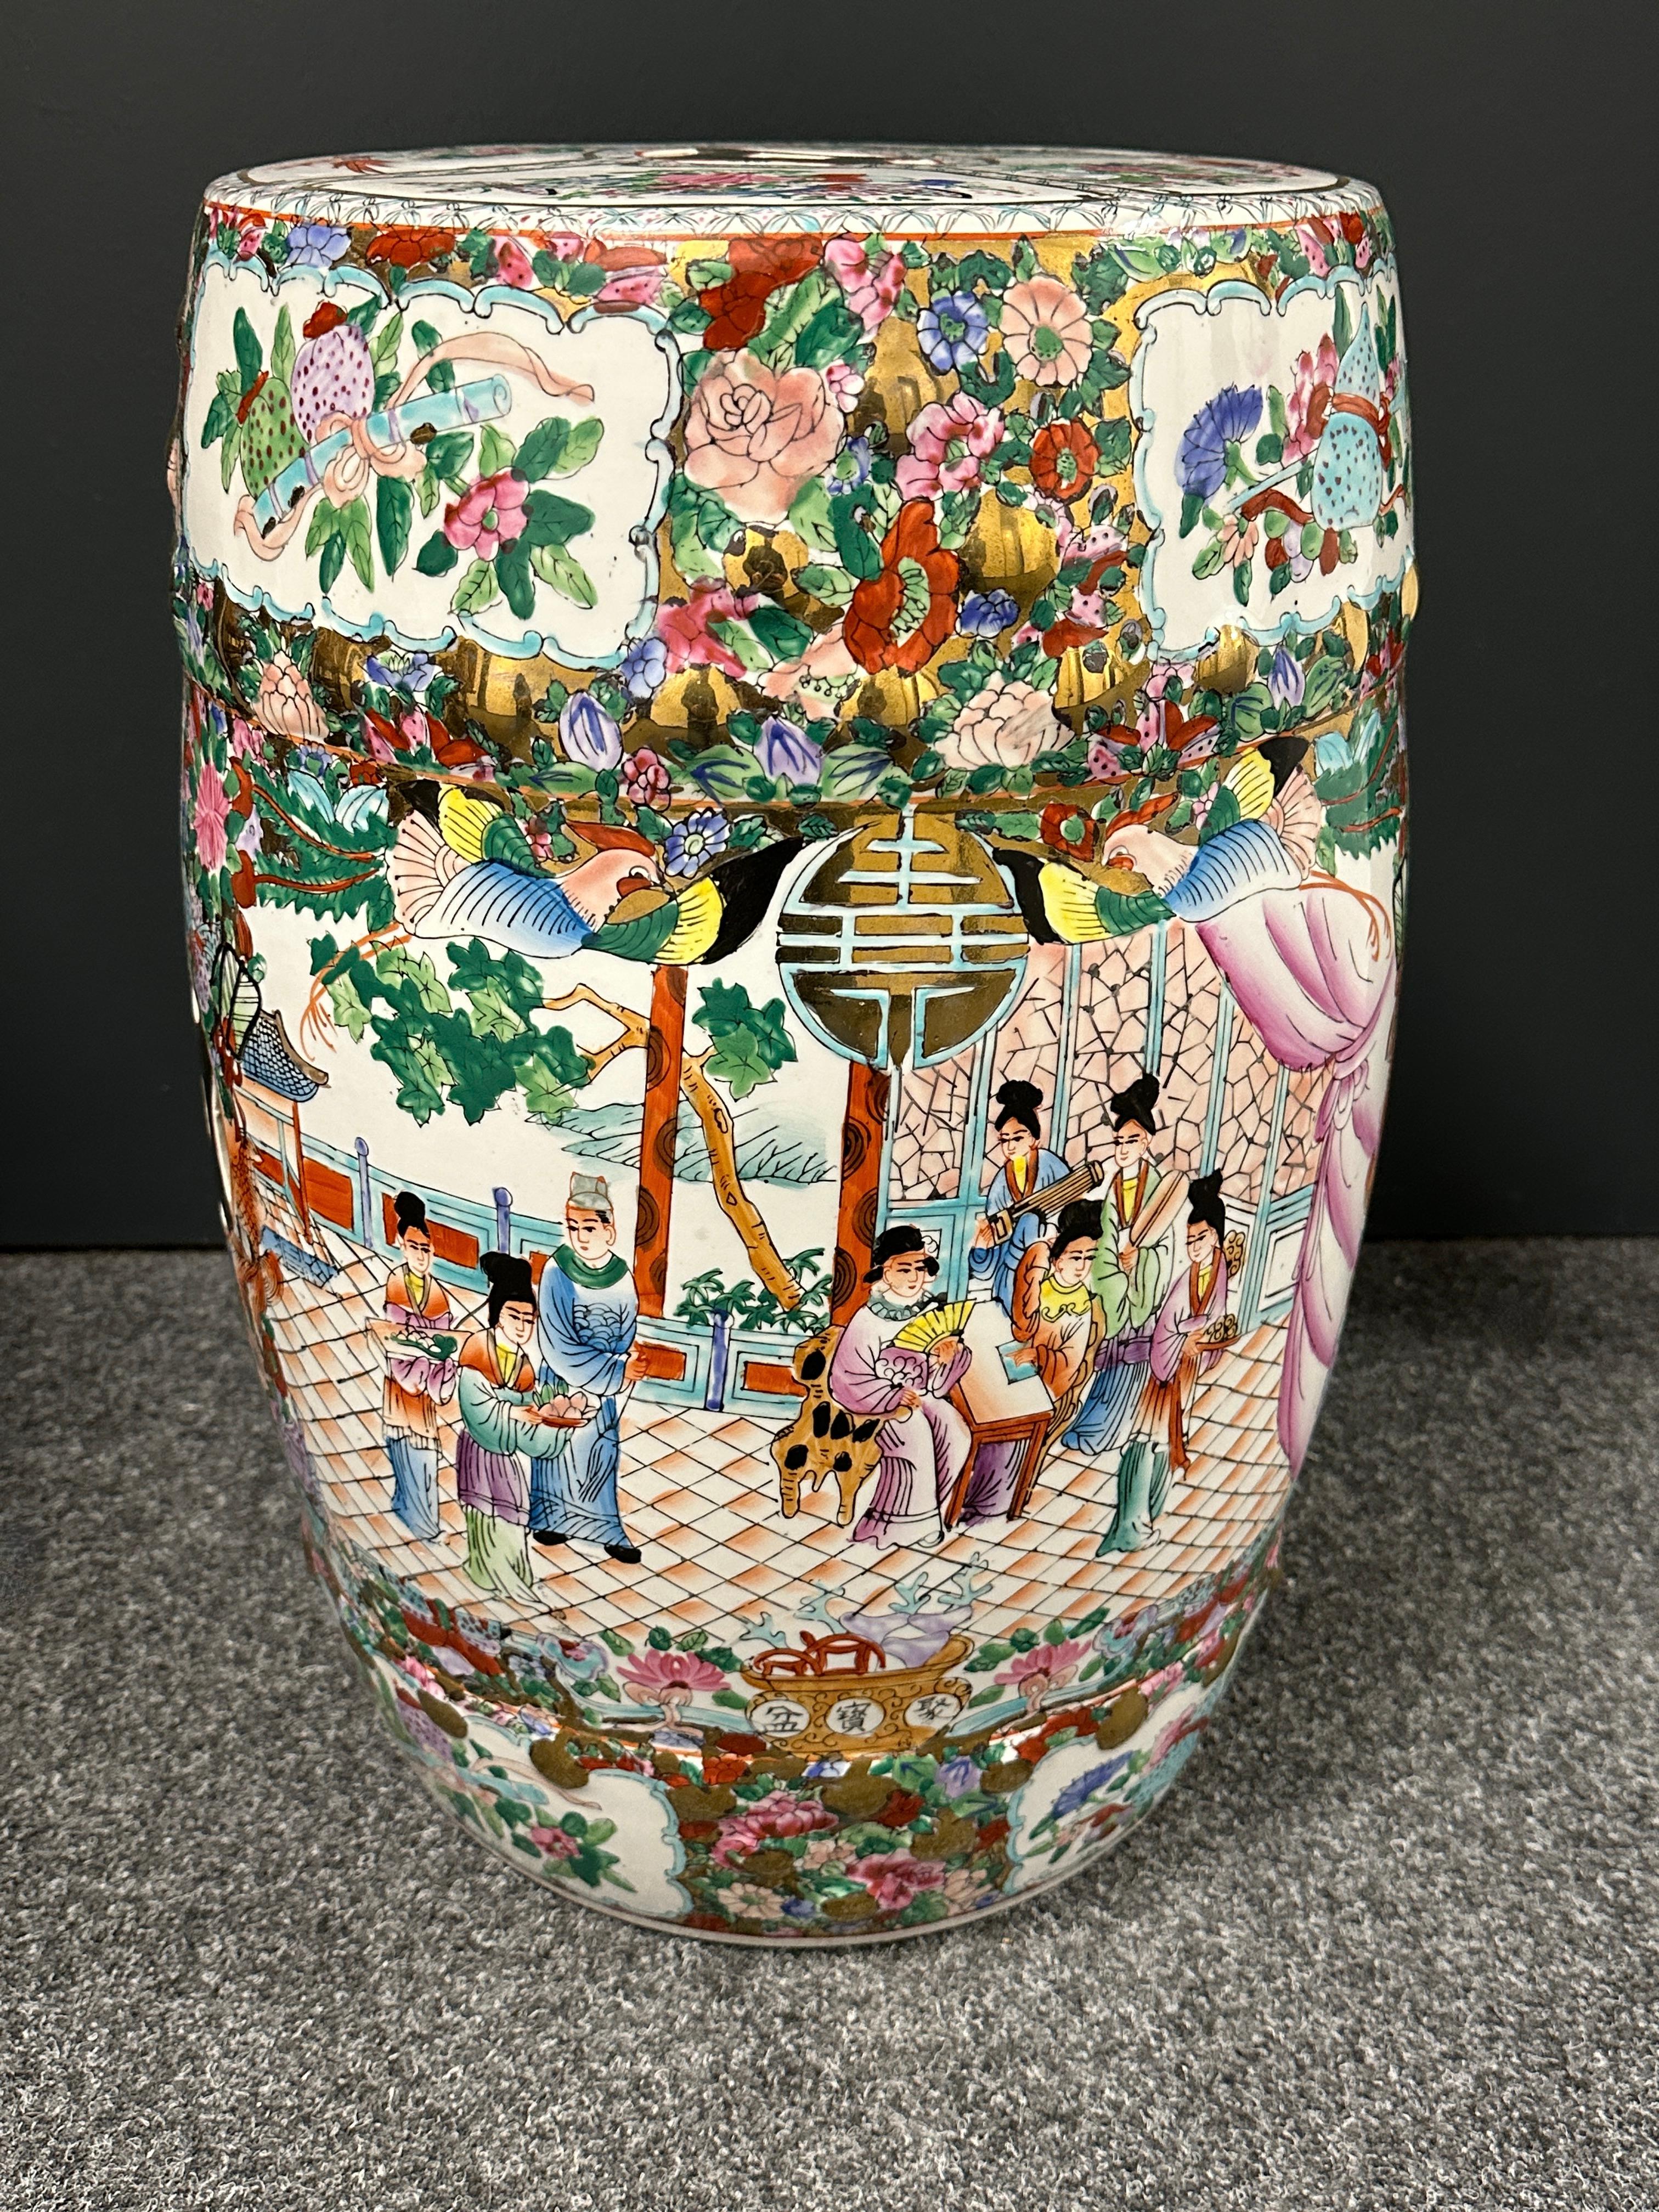 Hollywood Regency Mid-20th Century Chinese Export Hand-Painted Garden Stool Flower Pot Seat